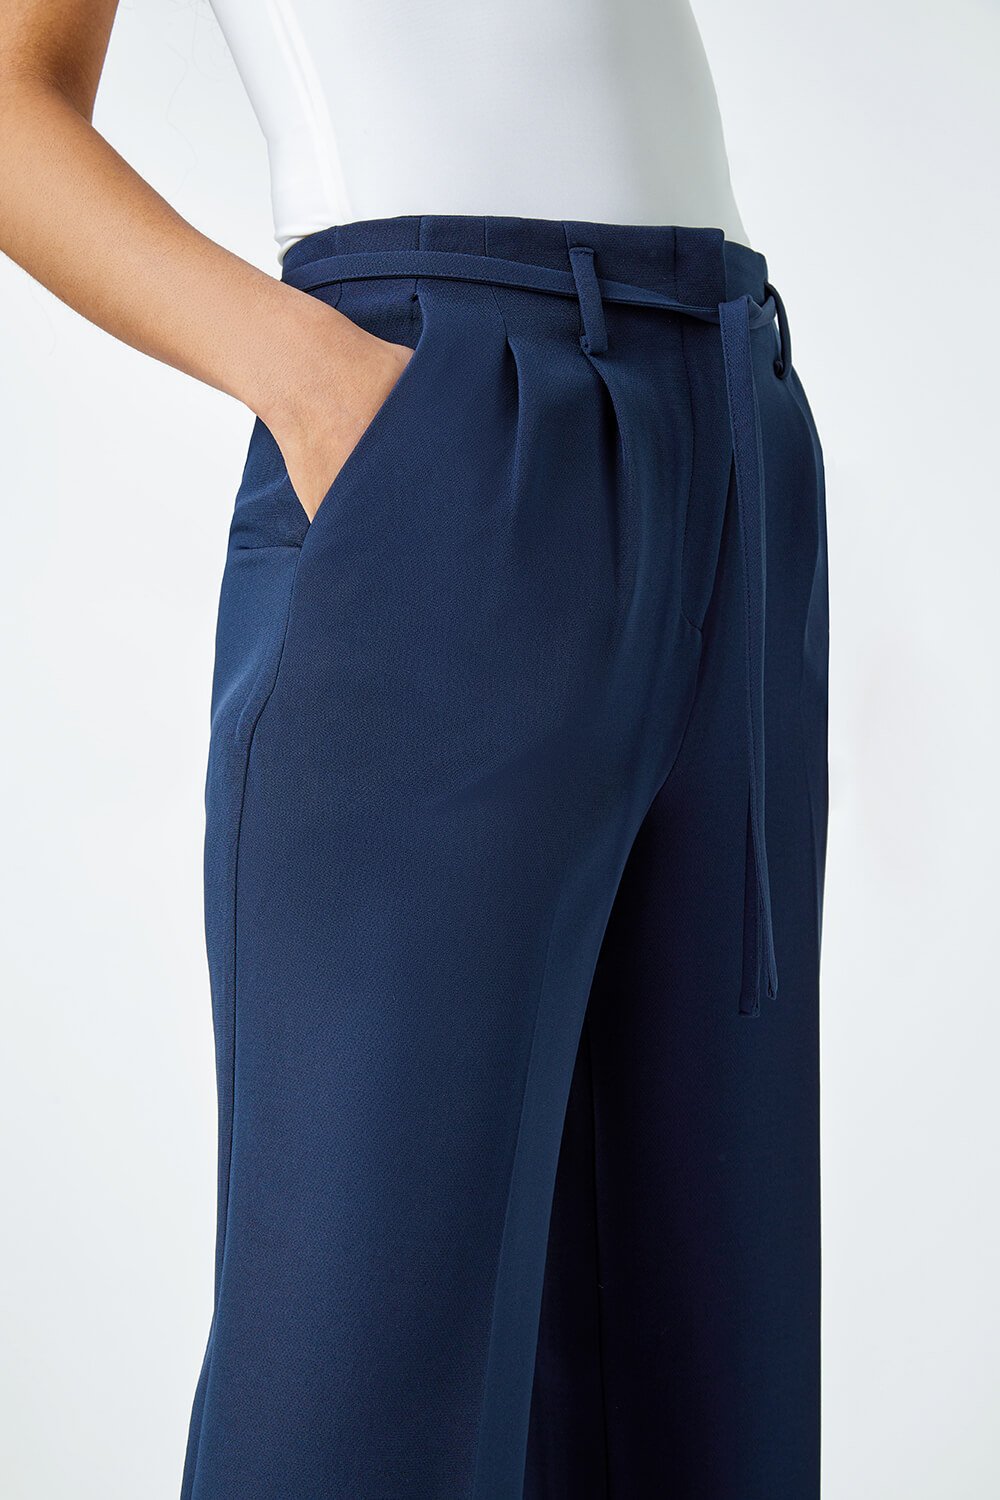 Navy  Crepe Stretch Straight Leg Trousers, Image 5 of 6